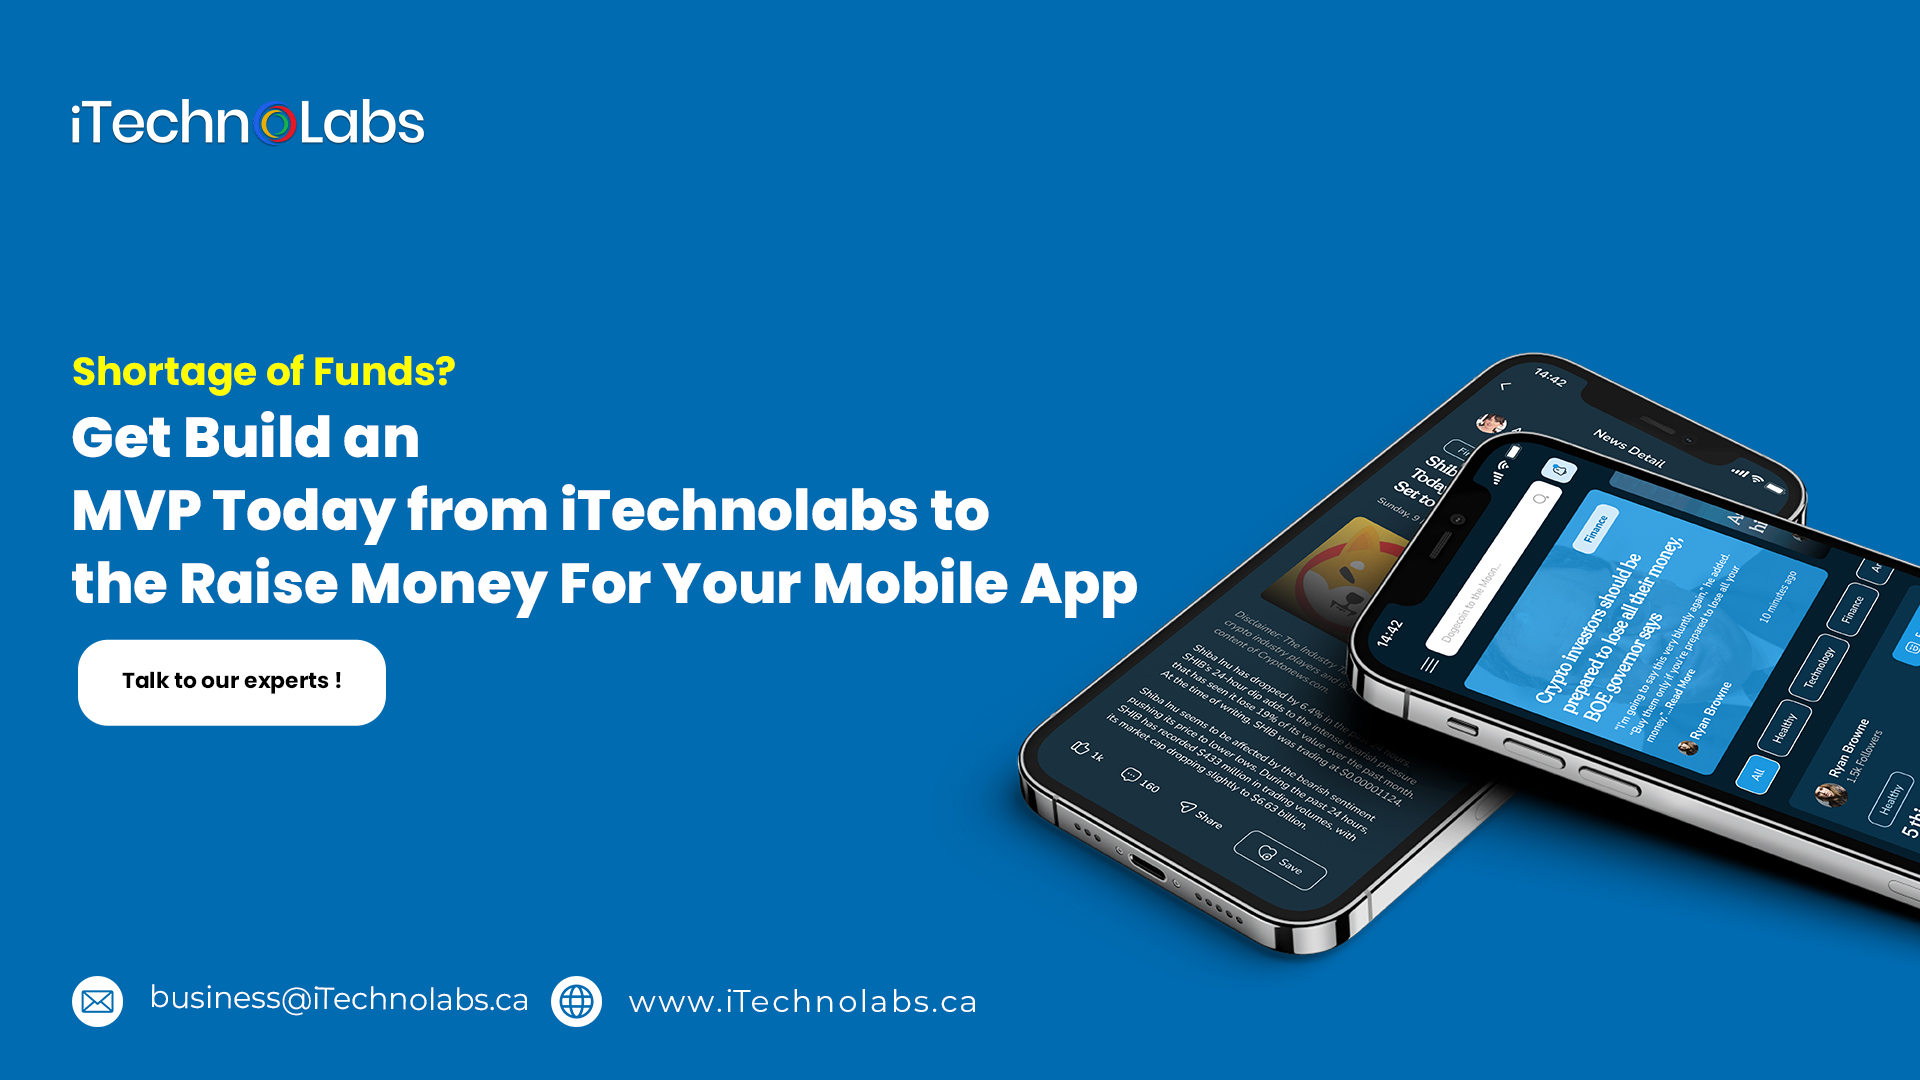 get build an mvp today from itechnolabs to raise money for your mobile app